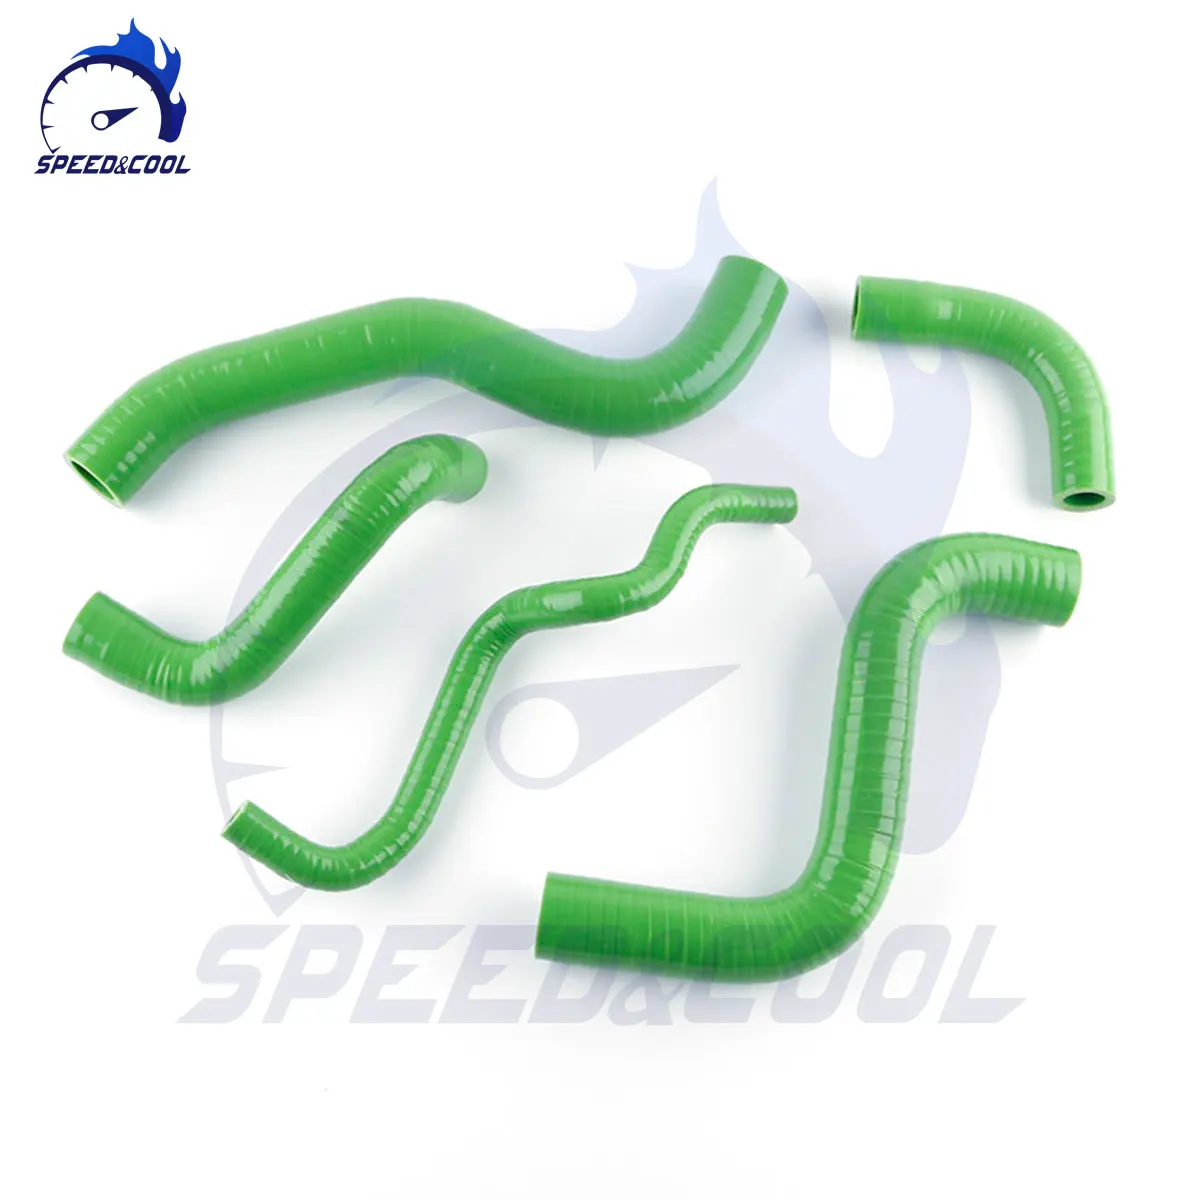 For 2007-2016 Suzuki Bandit 1250S GSF1250 GSF 1250 Motorcycle Silicone Radiator Coolant Hose Kit